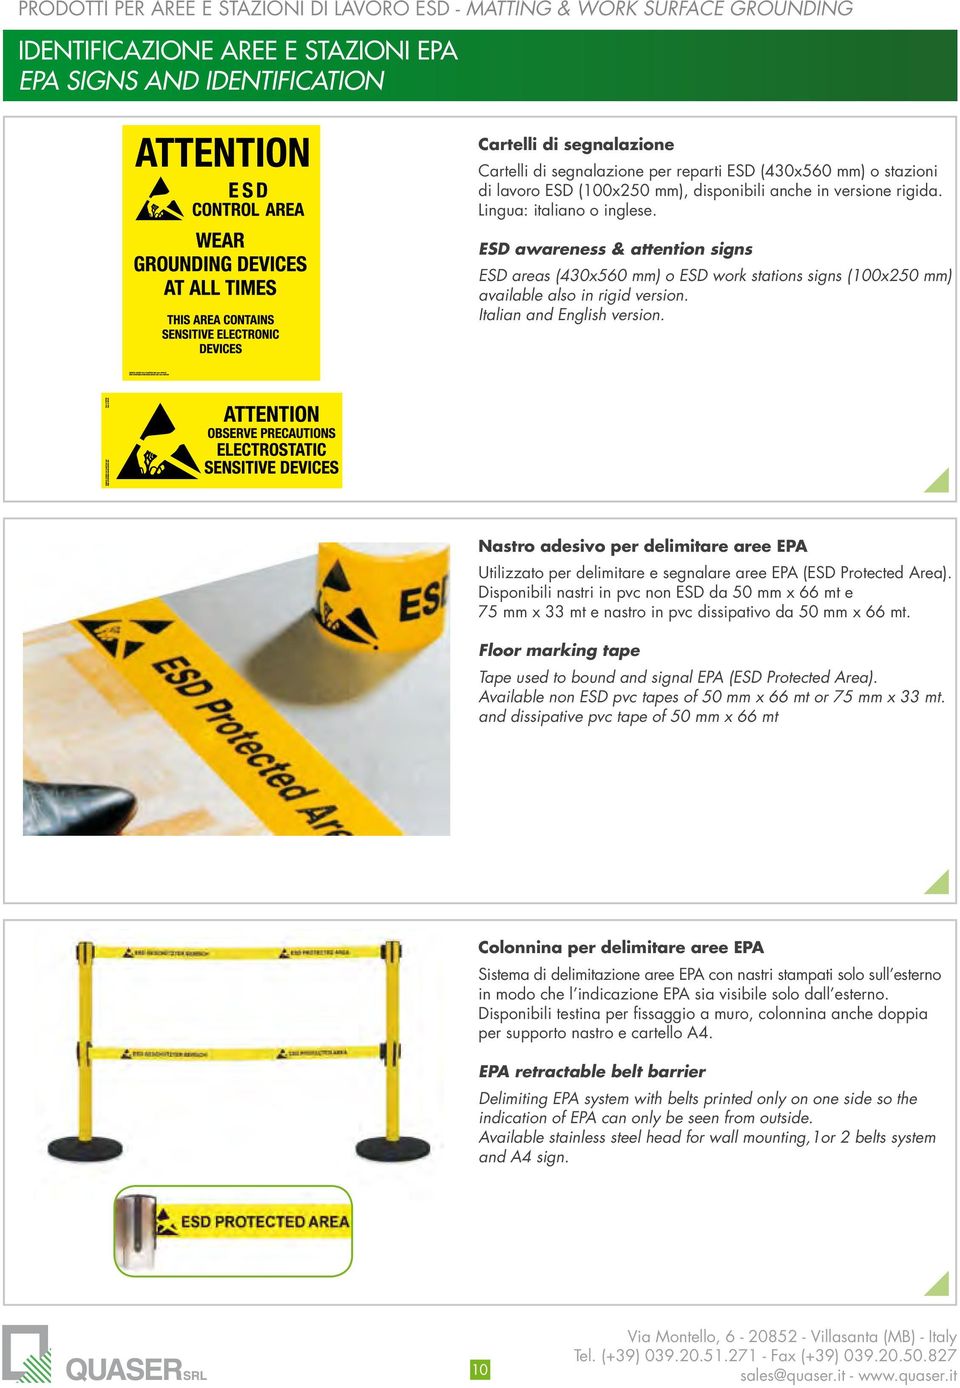 ESD awareness & attention signs ESD areas (430x560 mm) o ESD work stations signs (100x250 mm) available also in rigid version. Italian and English version.